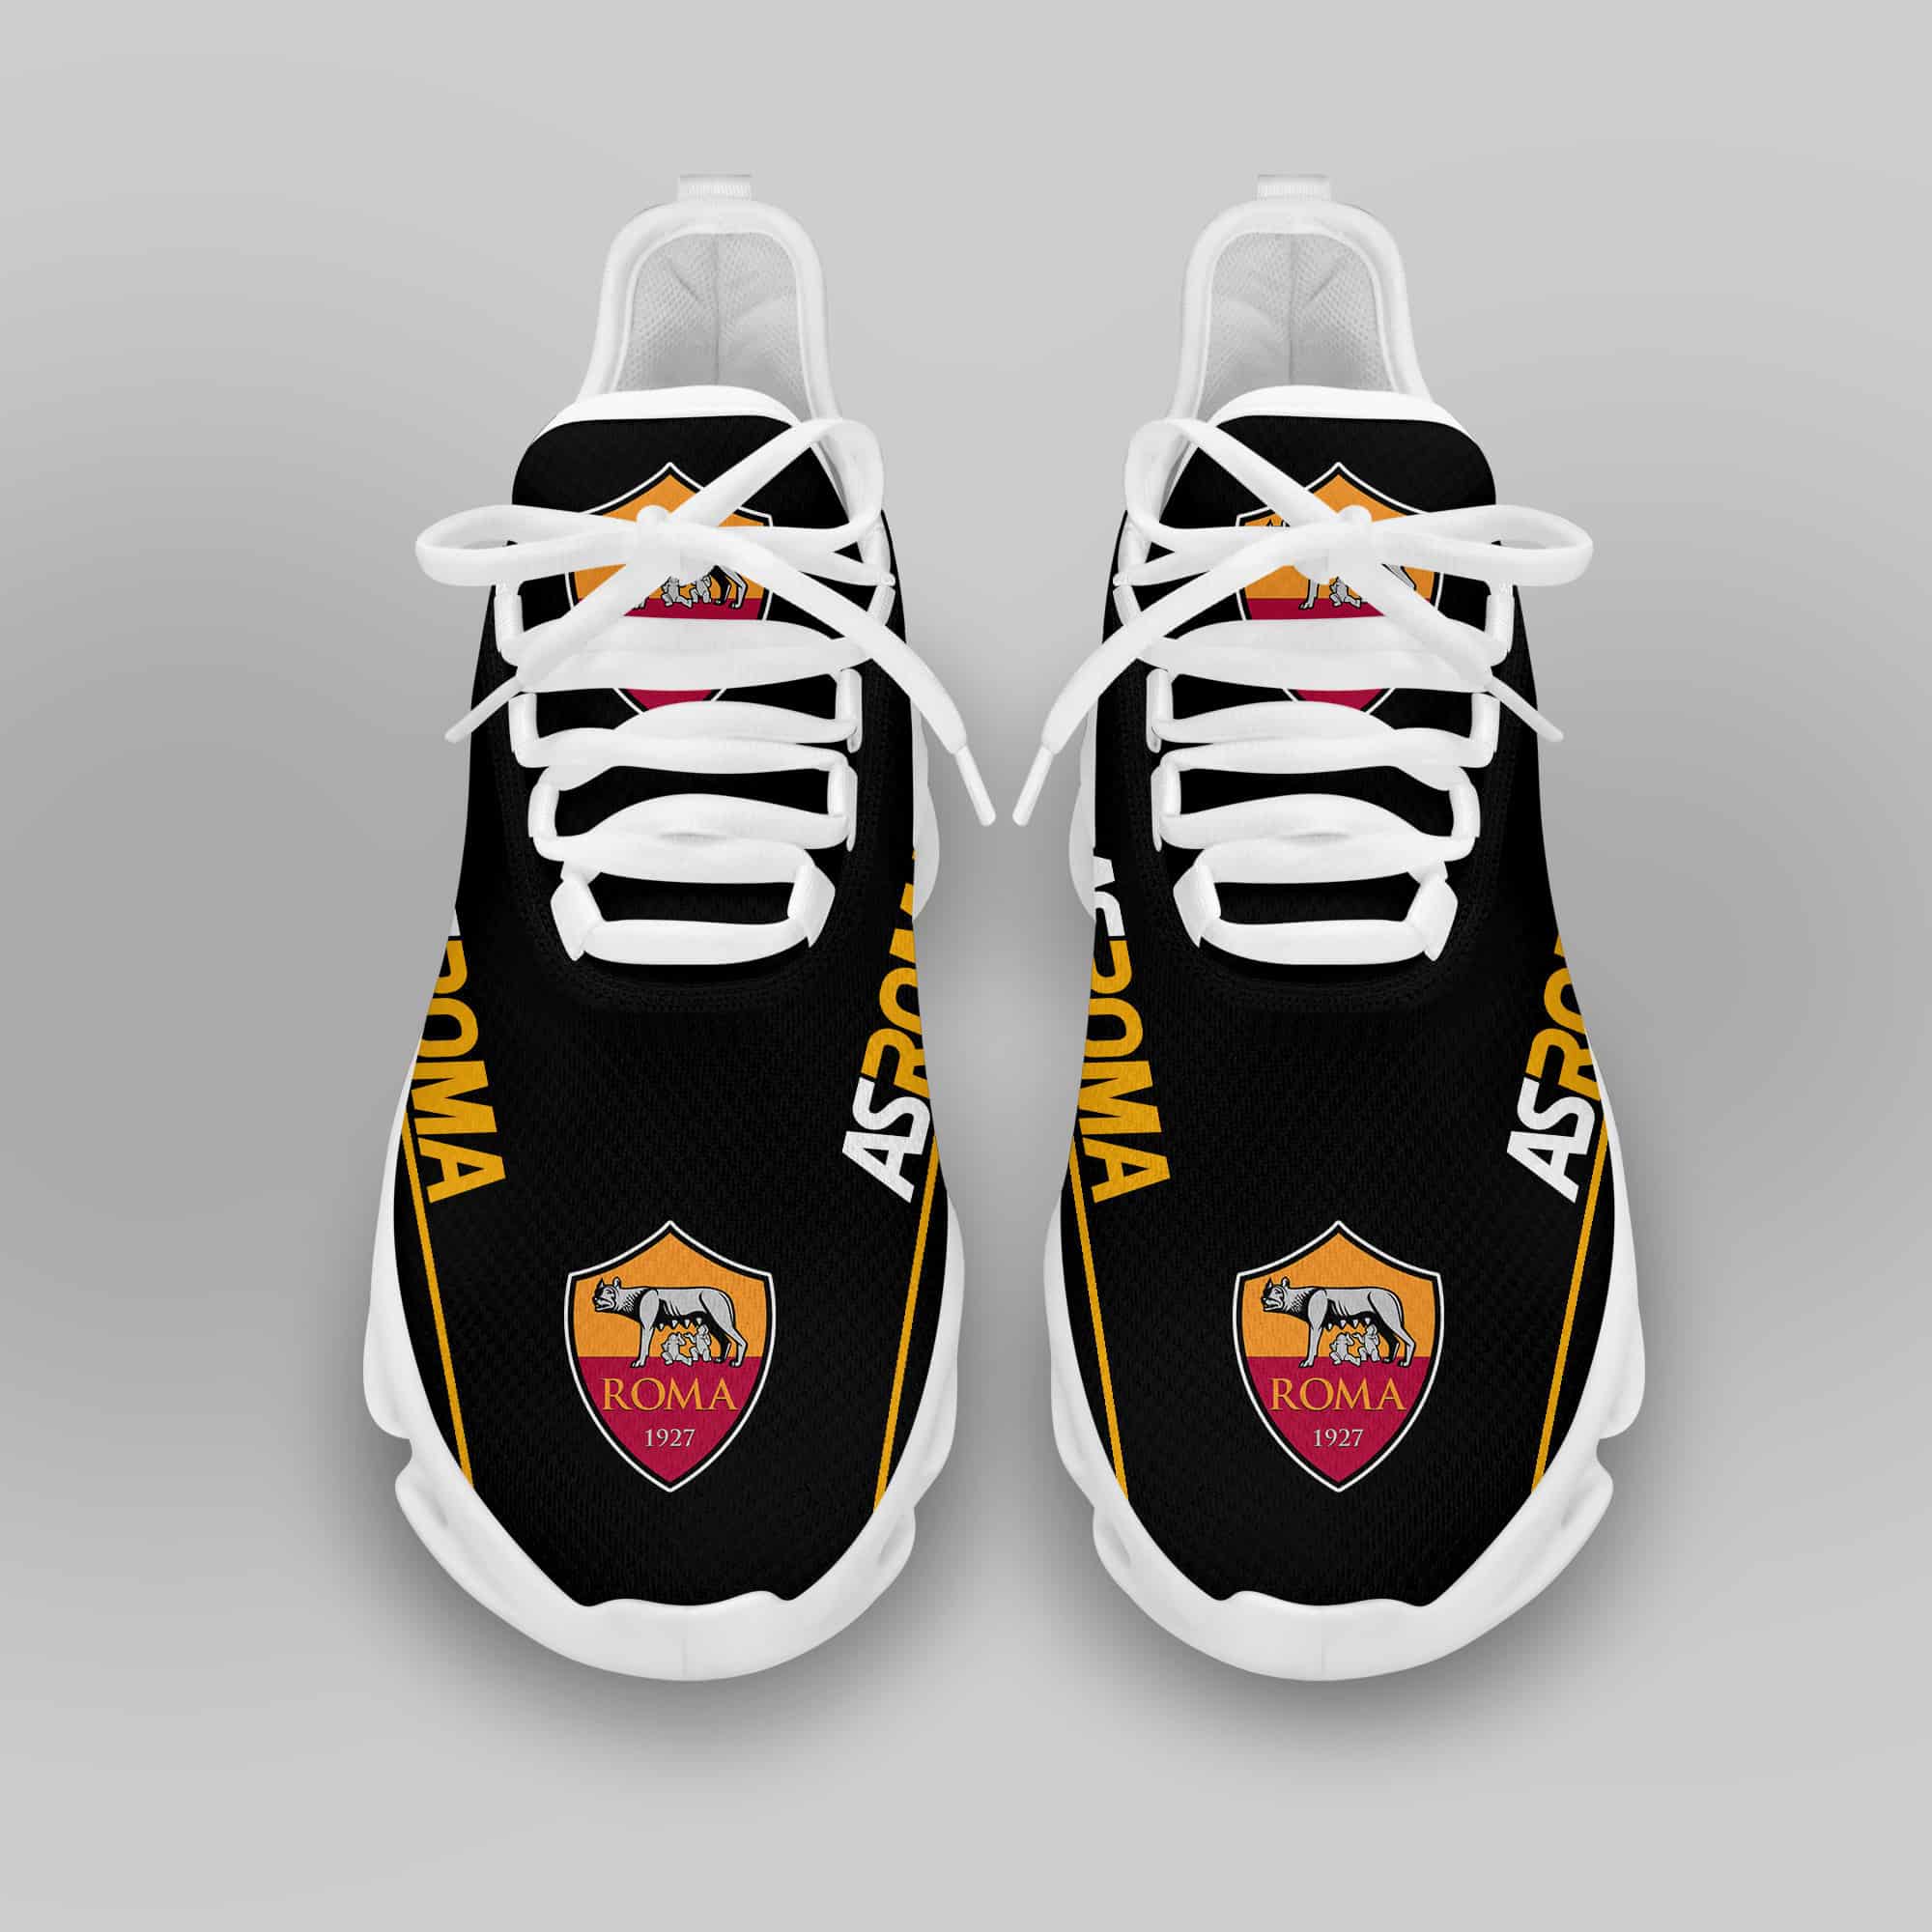 As Roma Running Shoes Max Soul Shoes Sneakers Ver 23 3